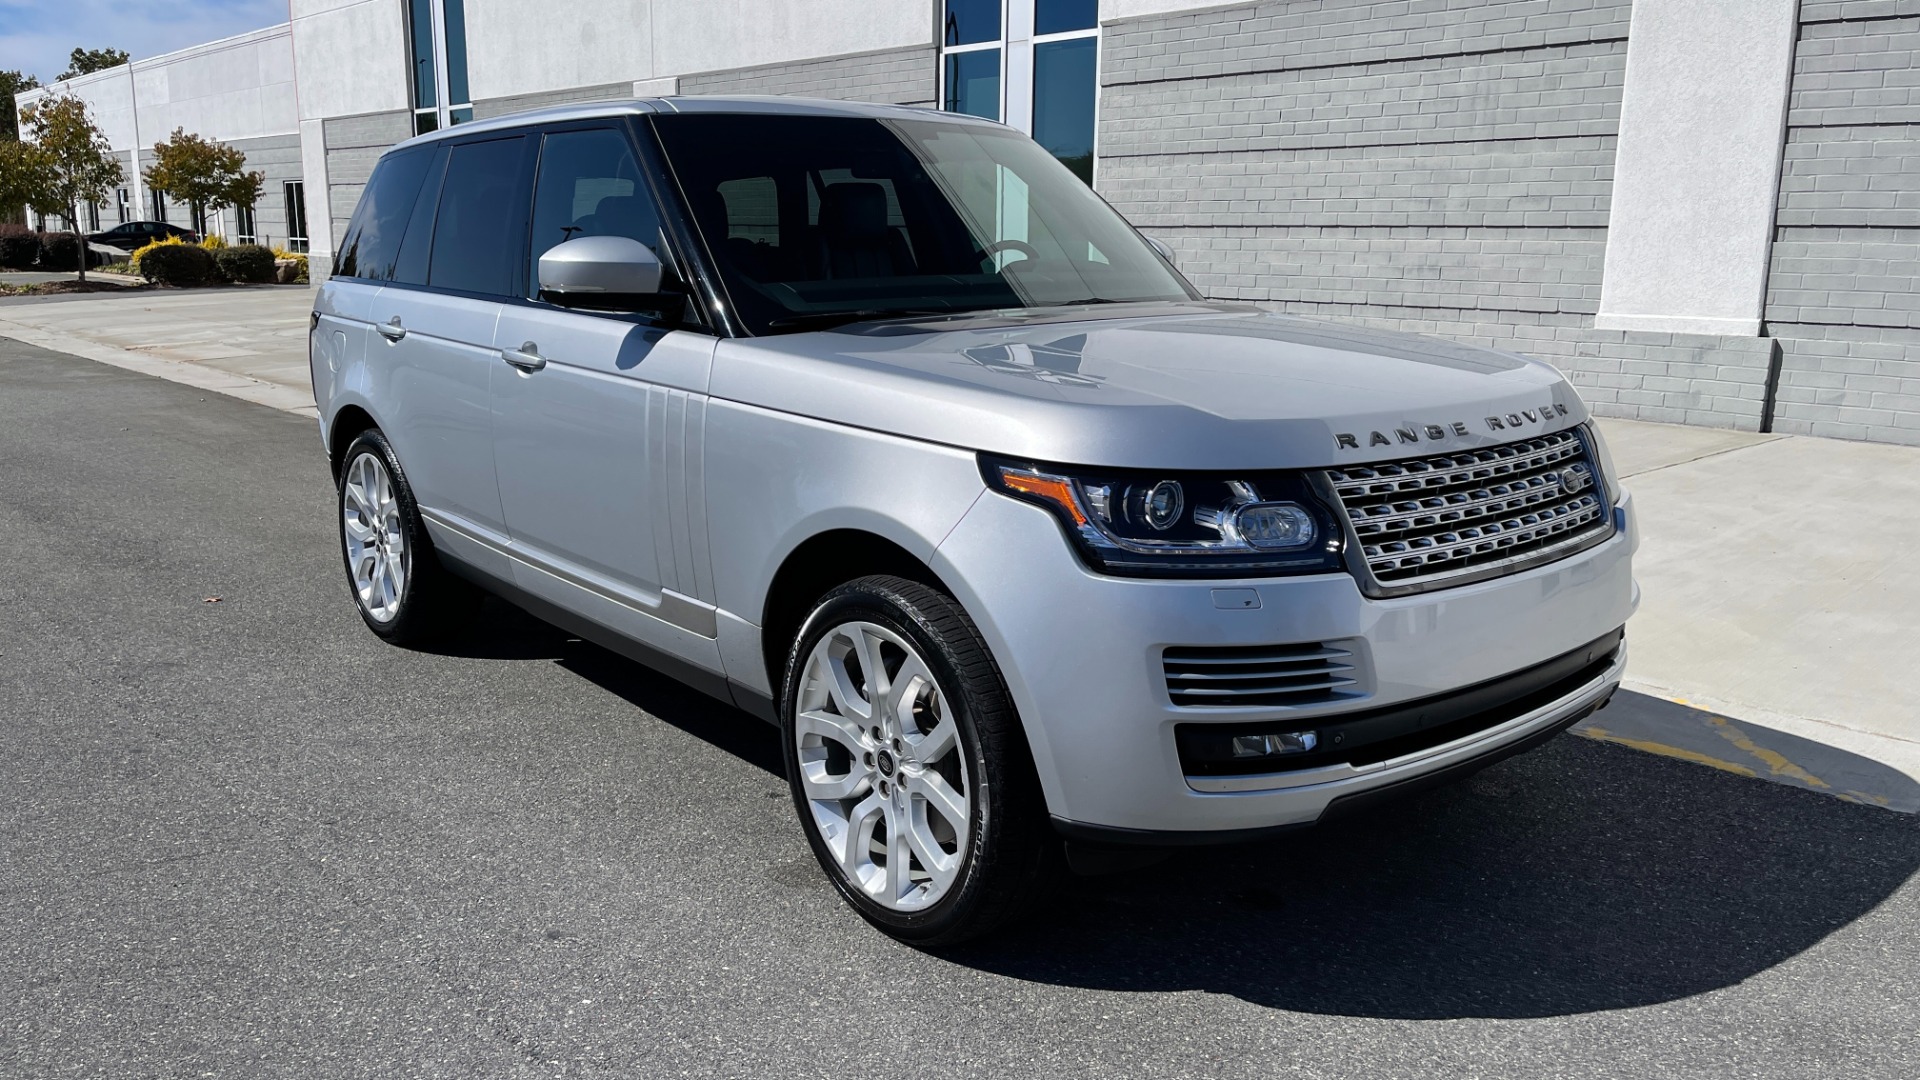 Used 2013 Land Rover Range Rover HSE / 22IN WHEELS / CLIMATE PACKAGE / SOFT CLOSE / VISION ASSIST for sale Sold at Formula Imports in Charlotte NC 28227 2